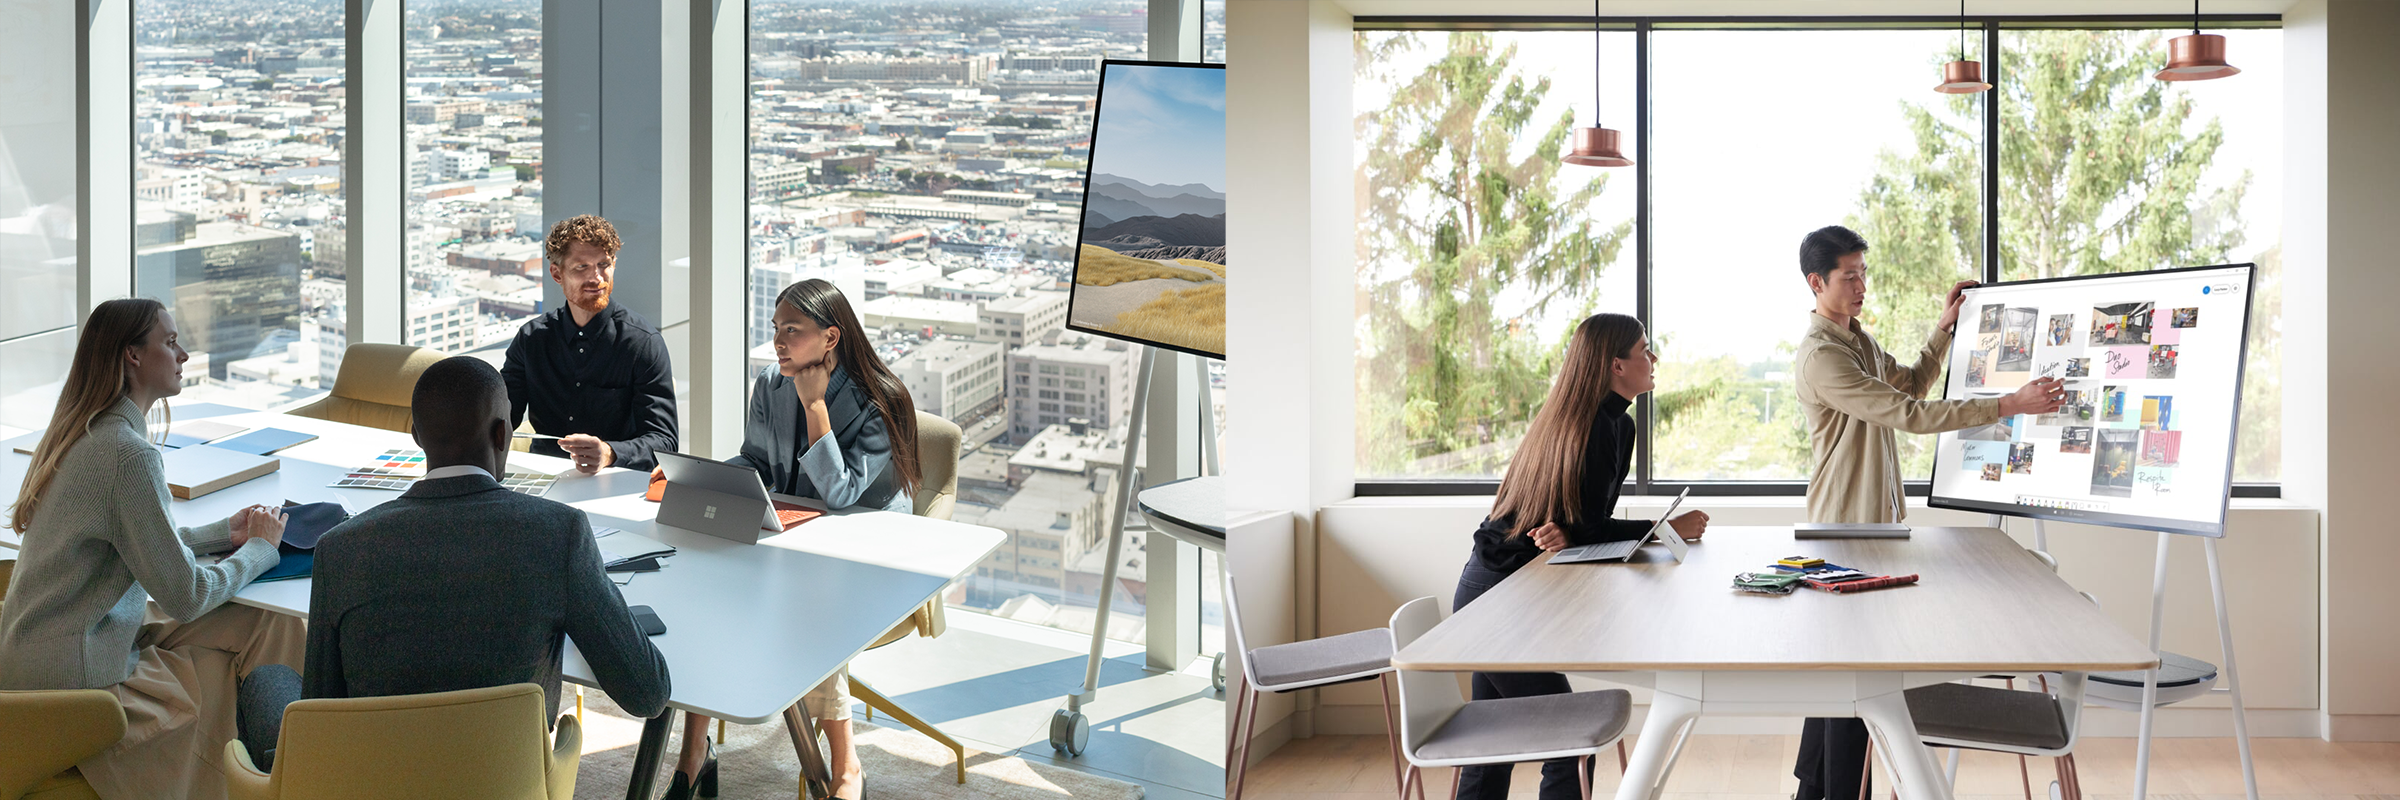 Two images show the Surface Hub in use in meeting rooms. 